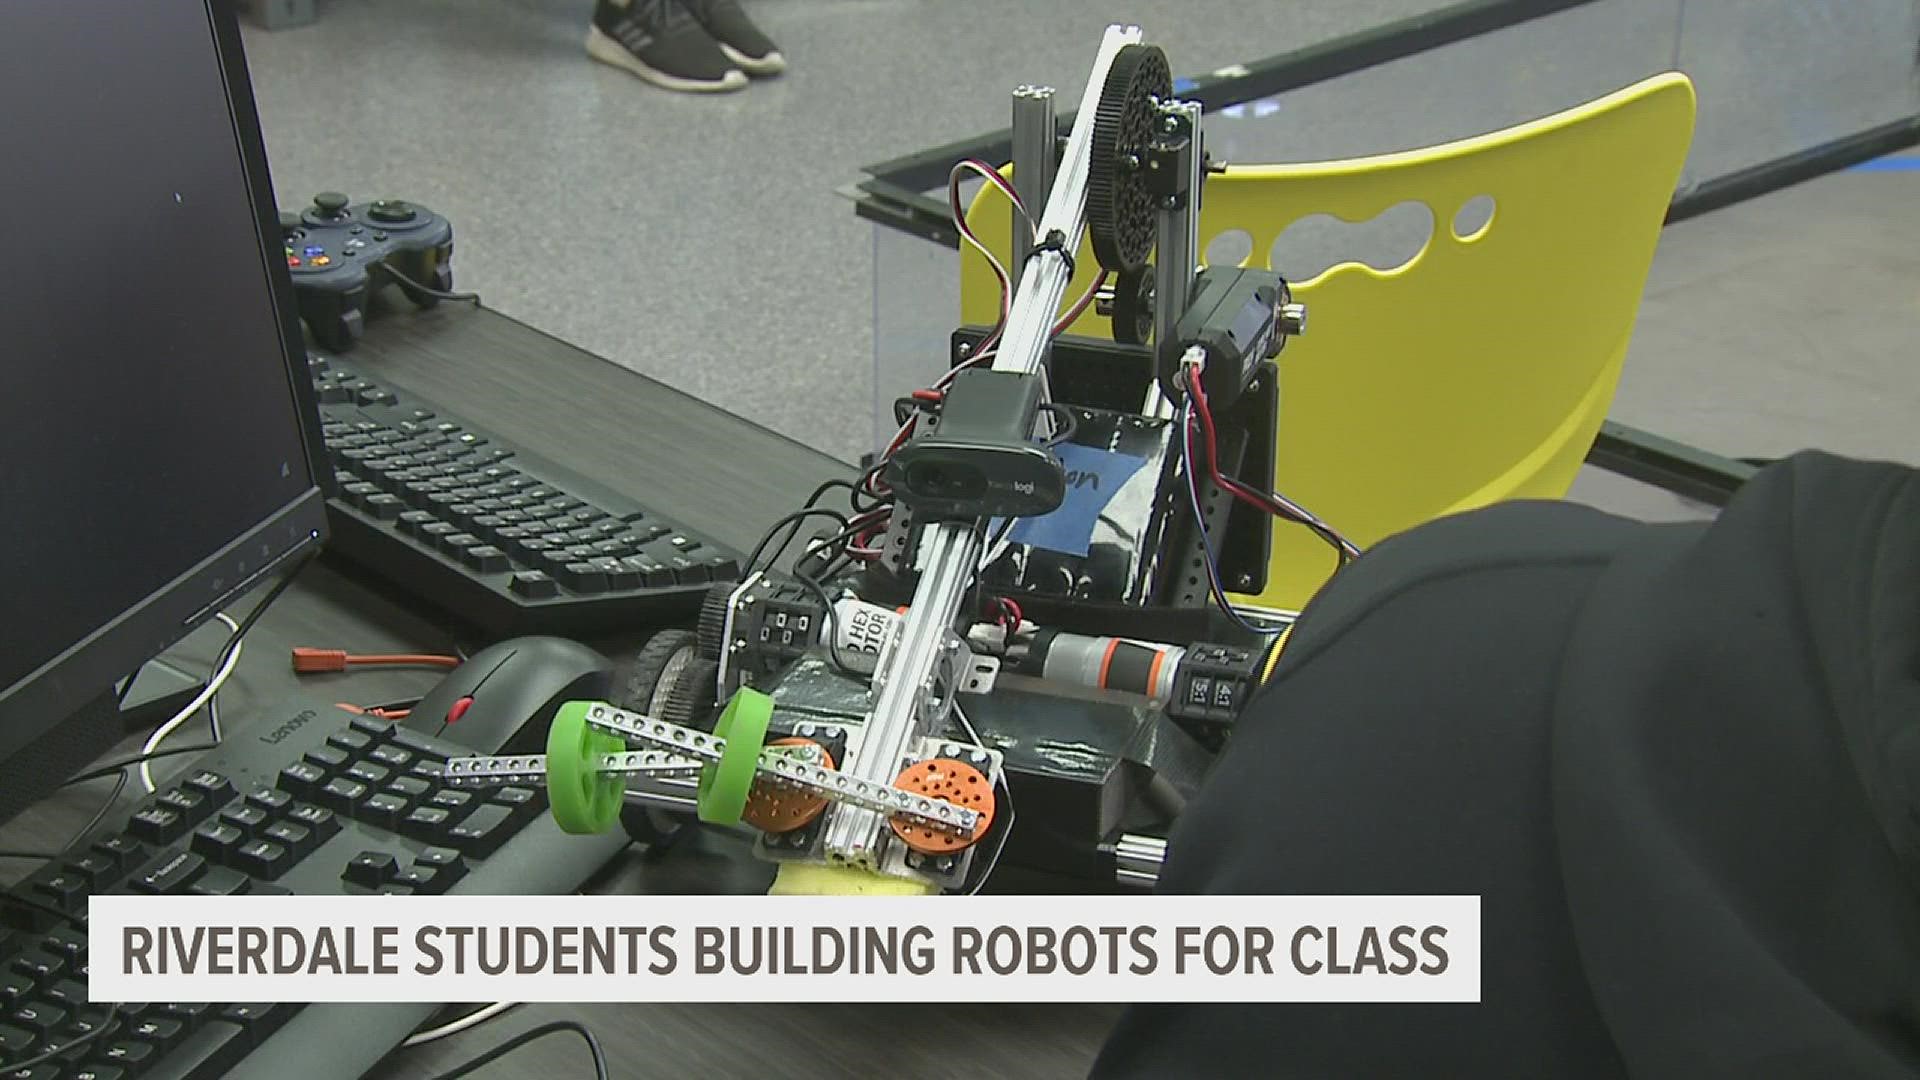 Riverdale High School students show off their robots that they created in their classroom.